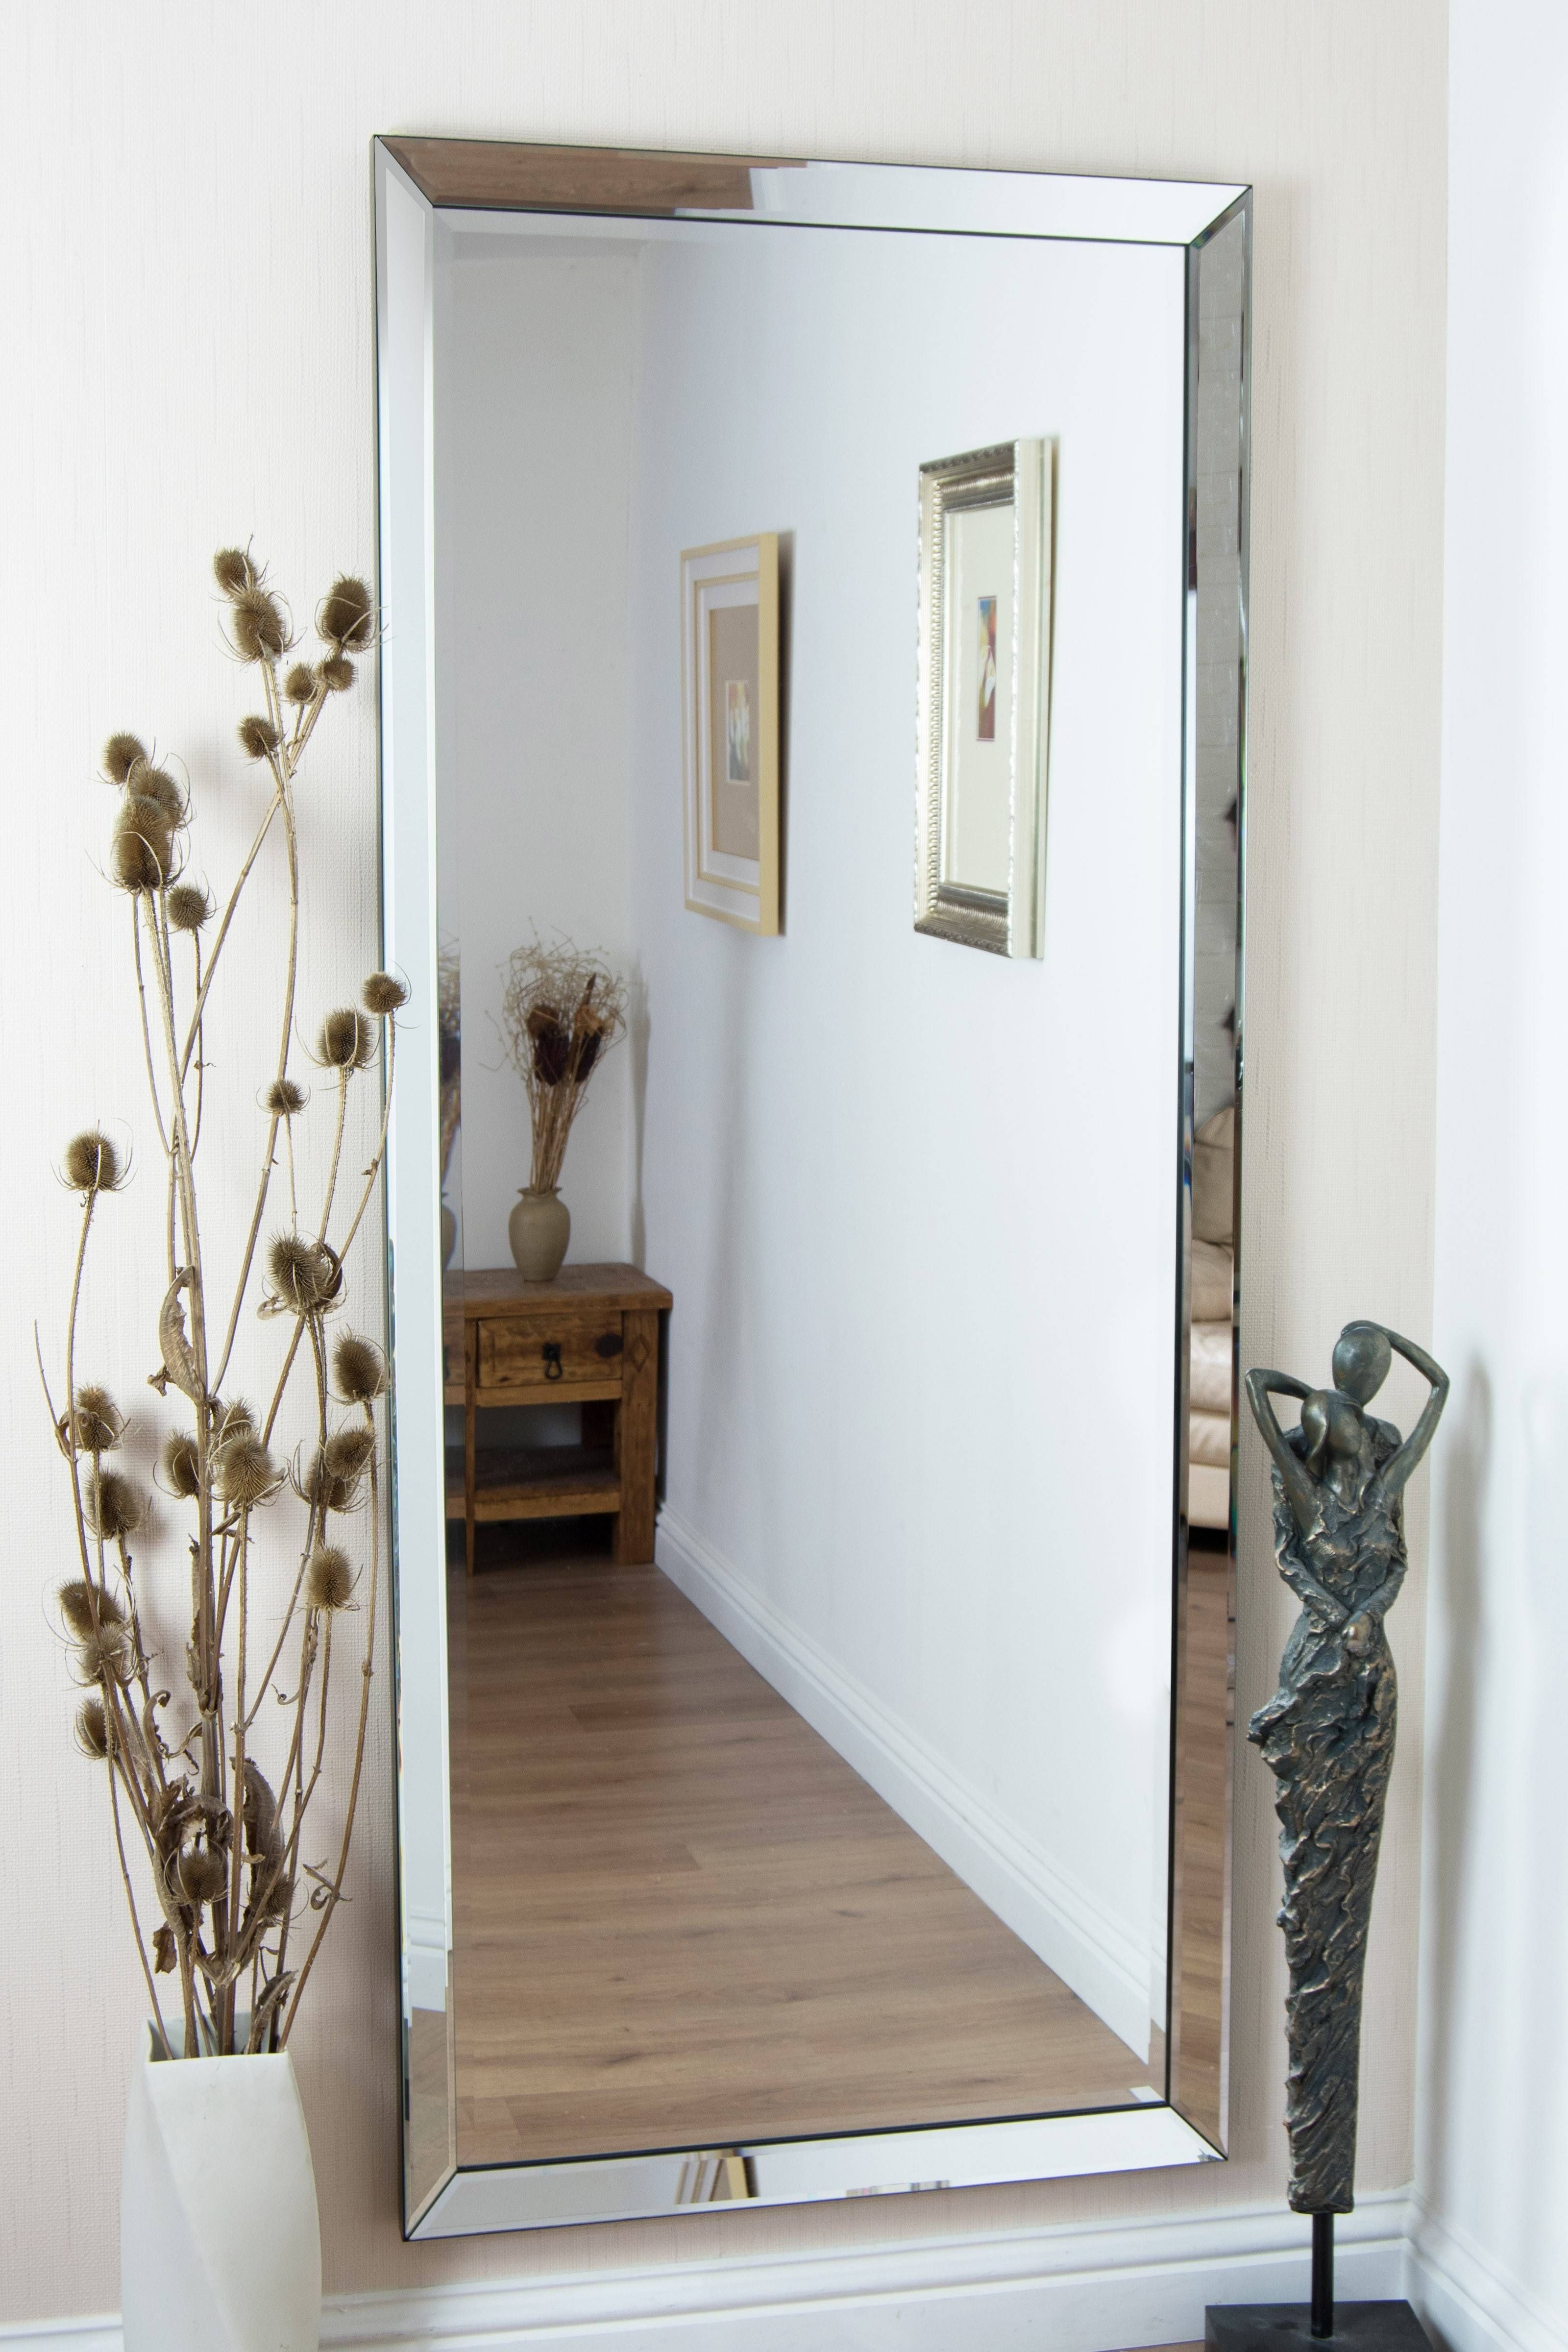 Full Length Mirrors For Sale 84 Cool Ideas For Frameless Mirror With Regard To Full Length Frameless Mirrors (View 6 of 25)